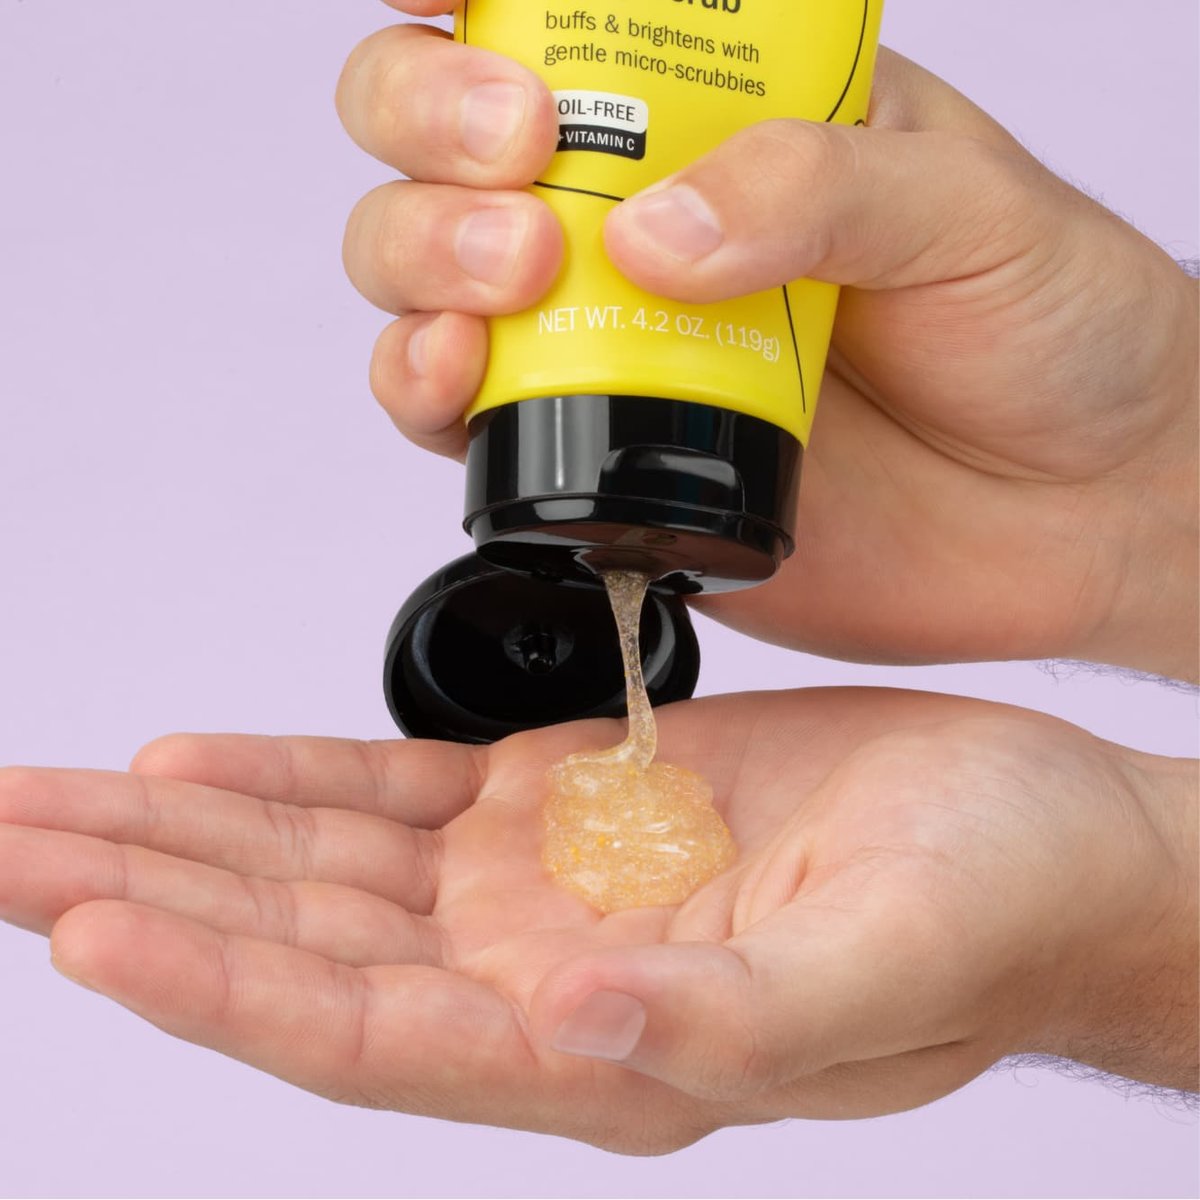 Clean & Clear lemon zesty scrub with yellow tube and black cap squeezed into palm of hand in front of light purple background